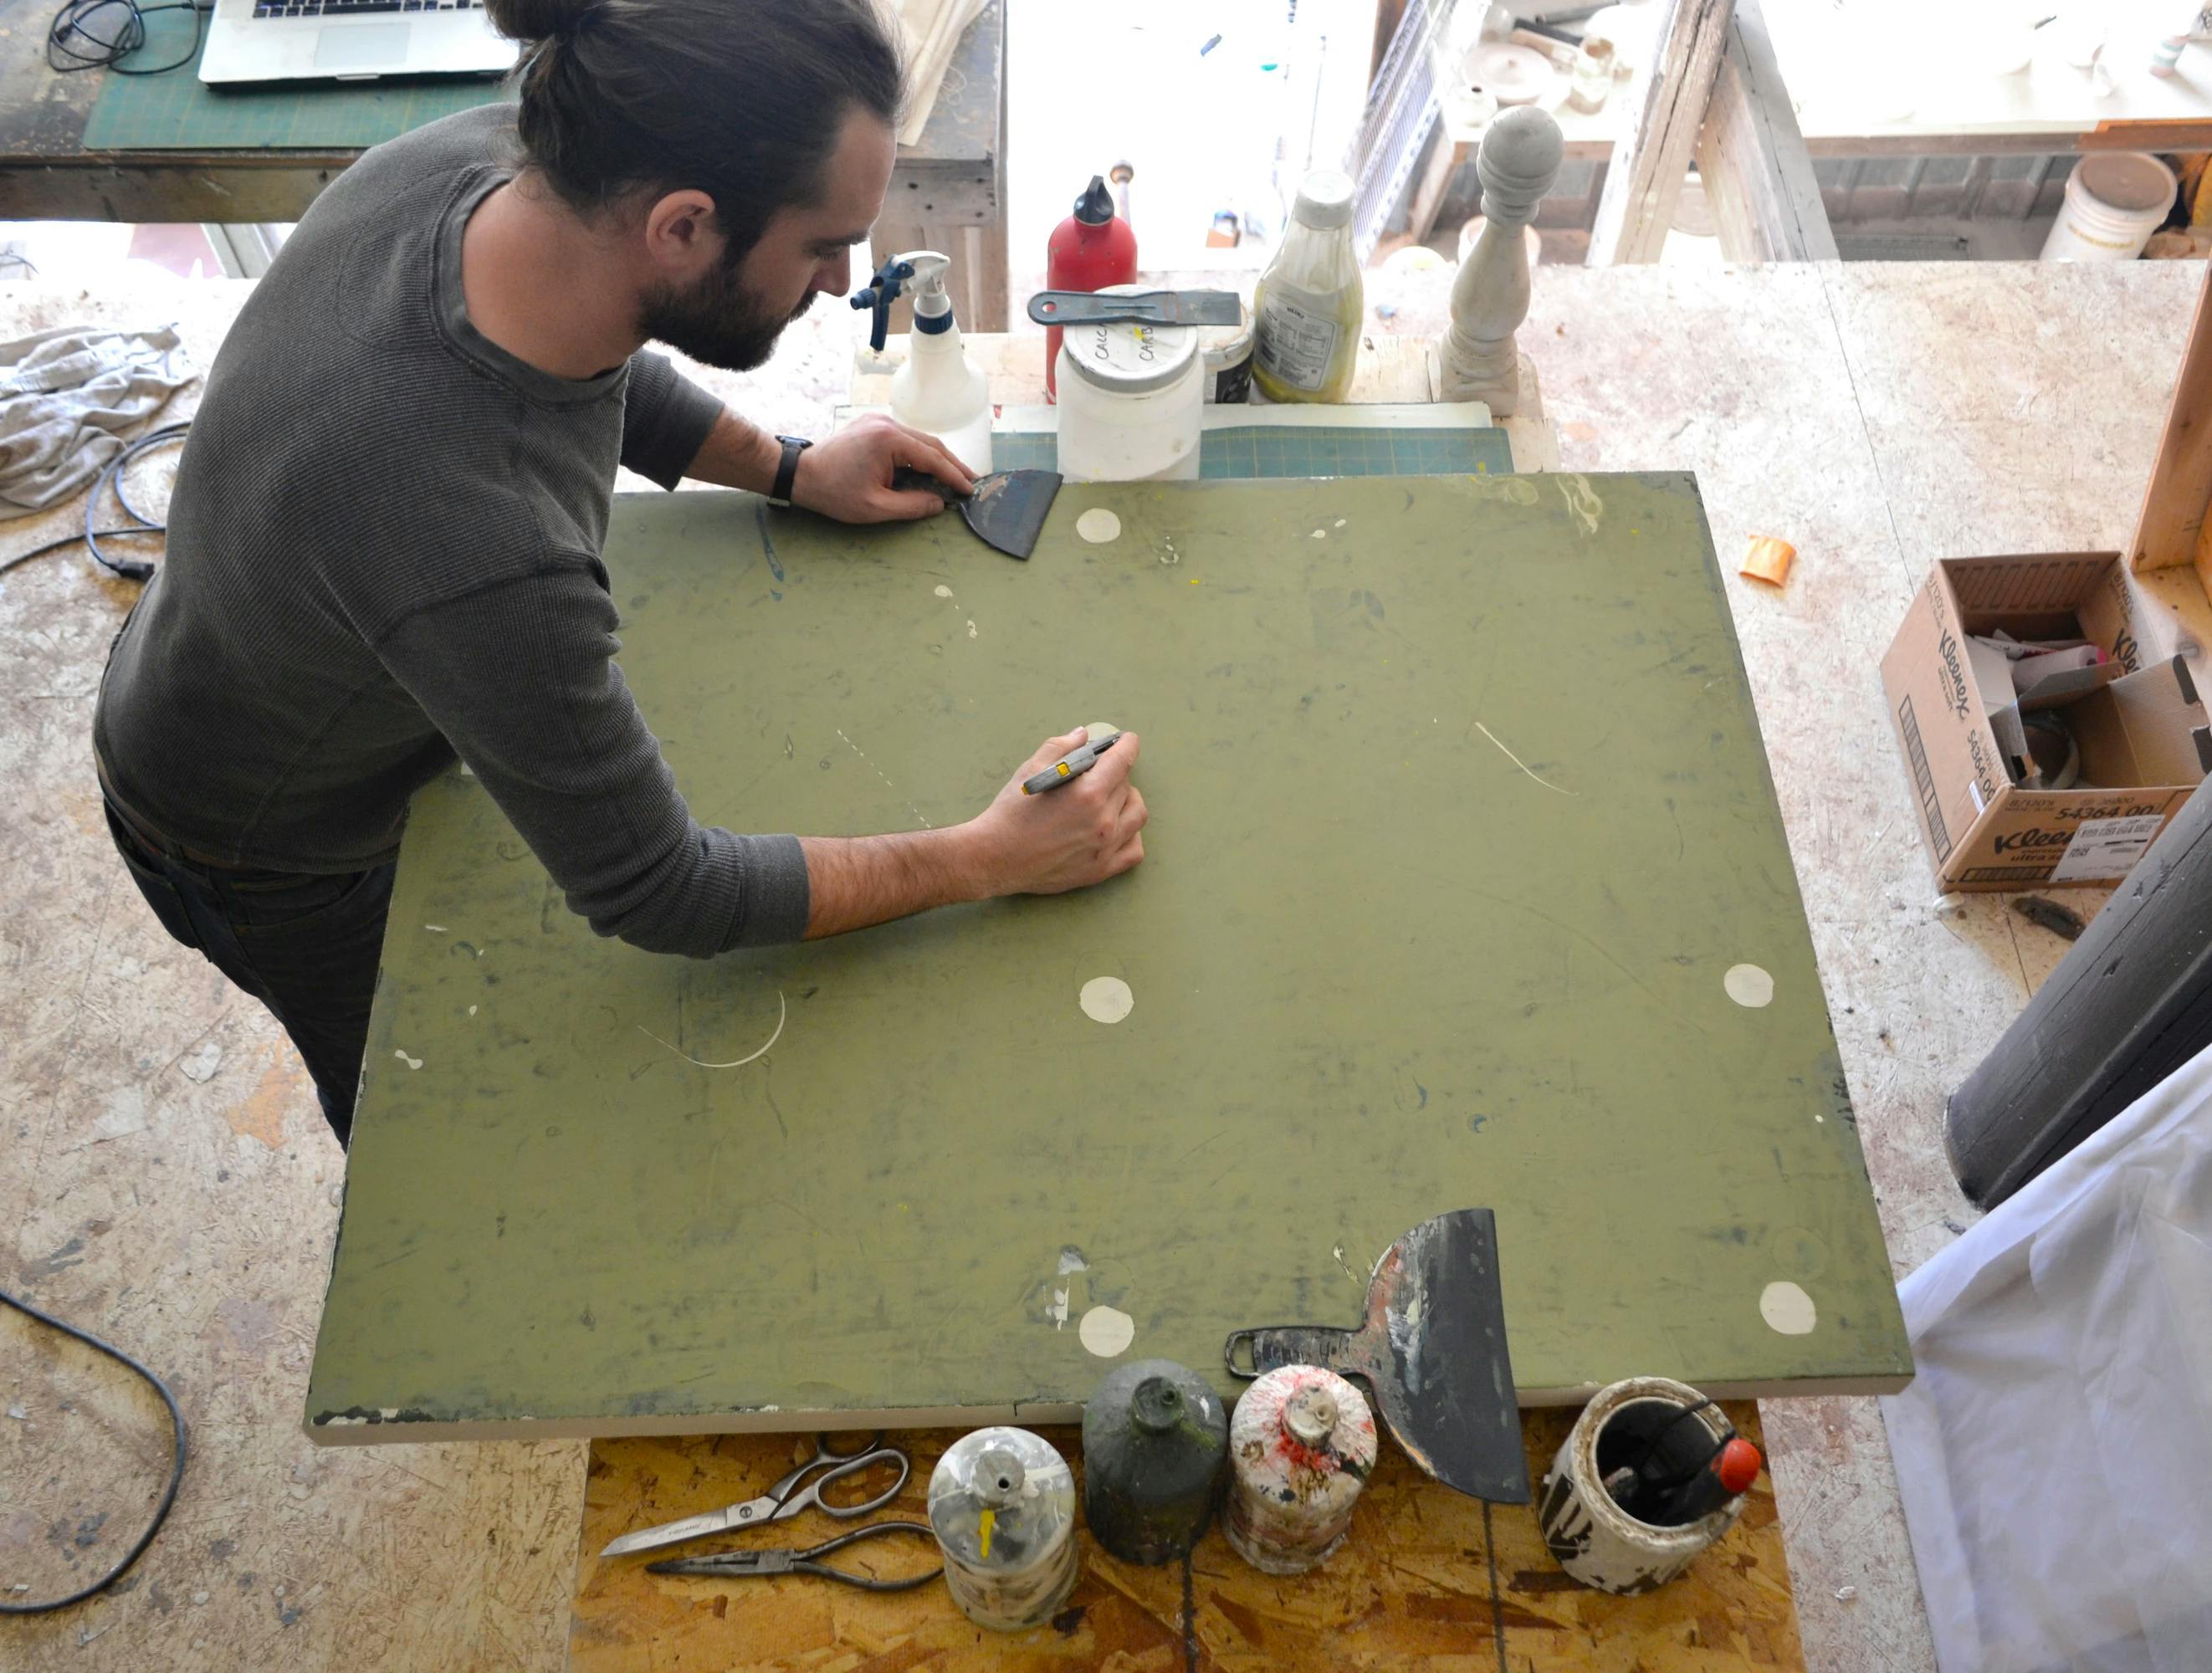 Artist Clay Mahn in his studio working on a distressed green canvas with beige dots.